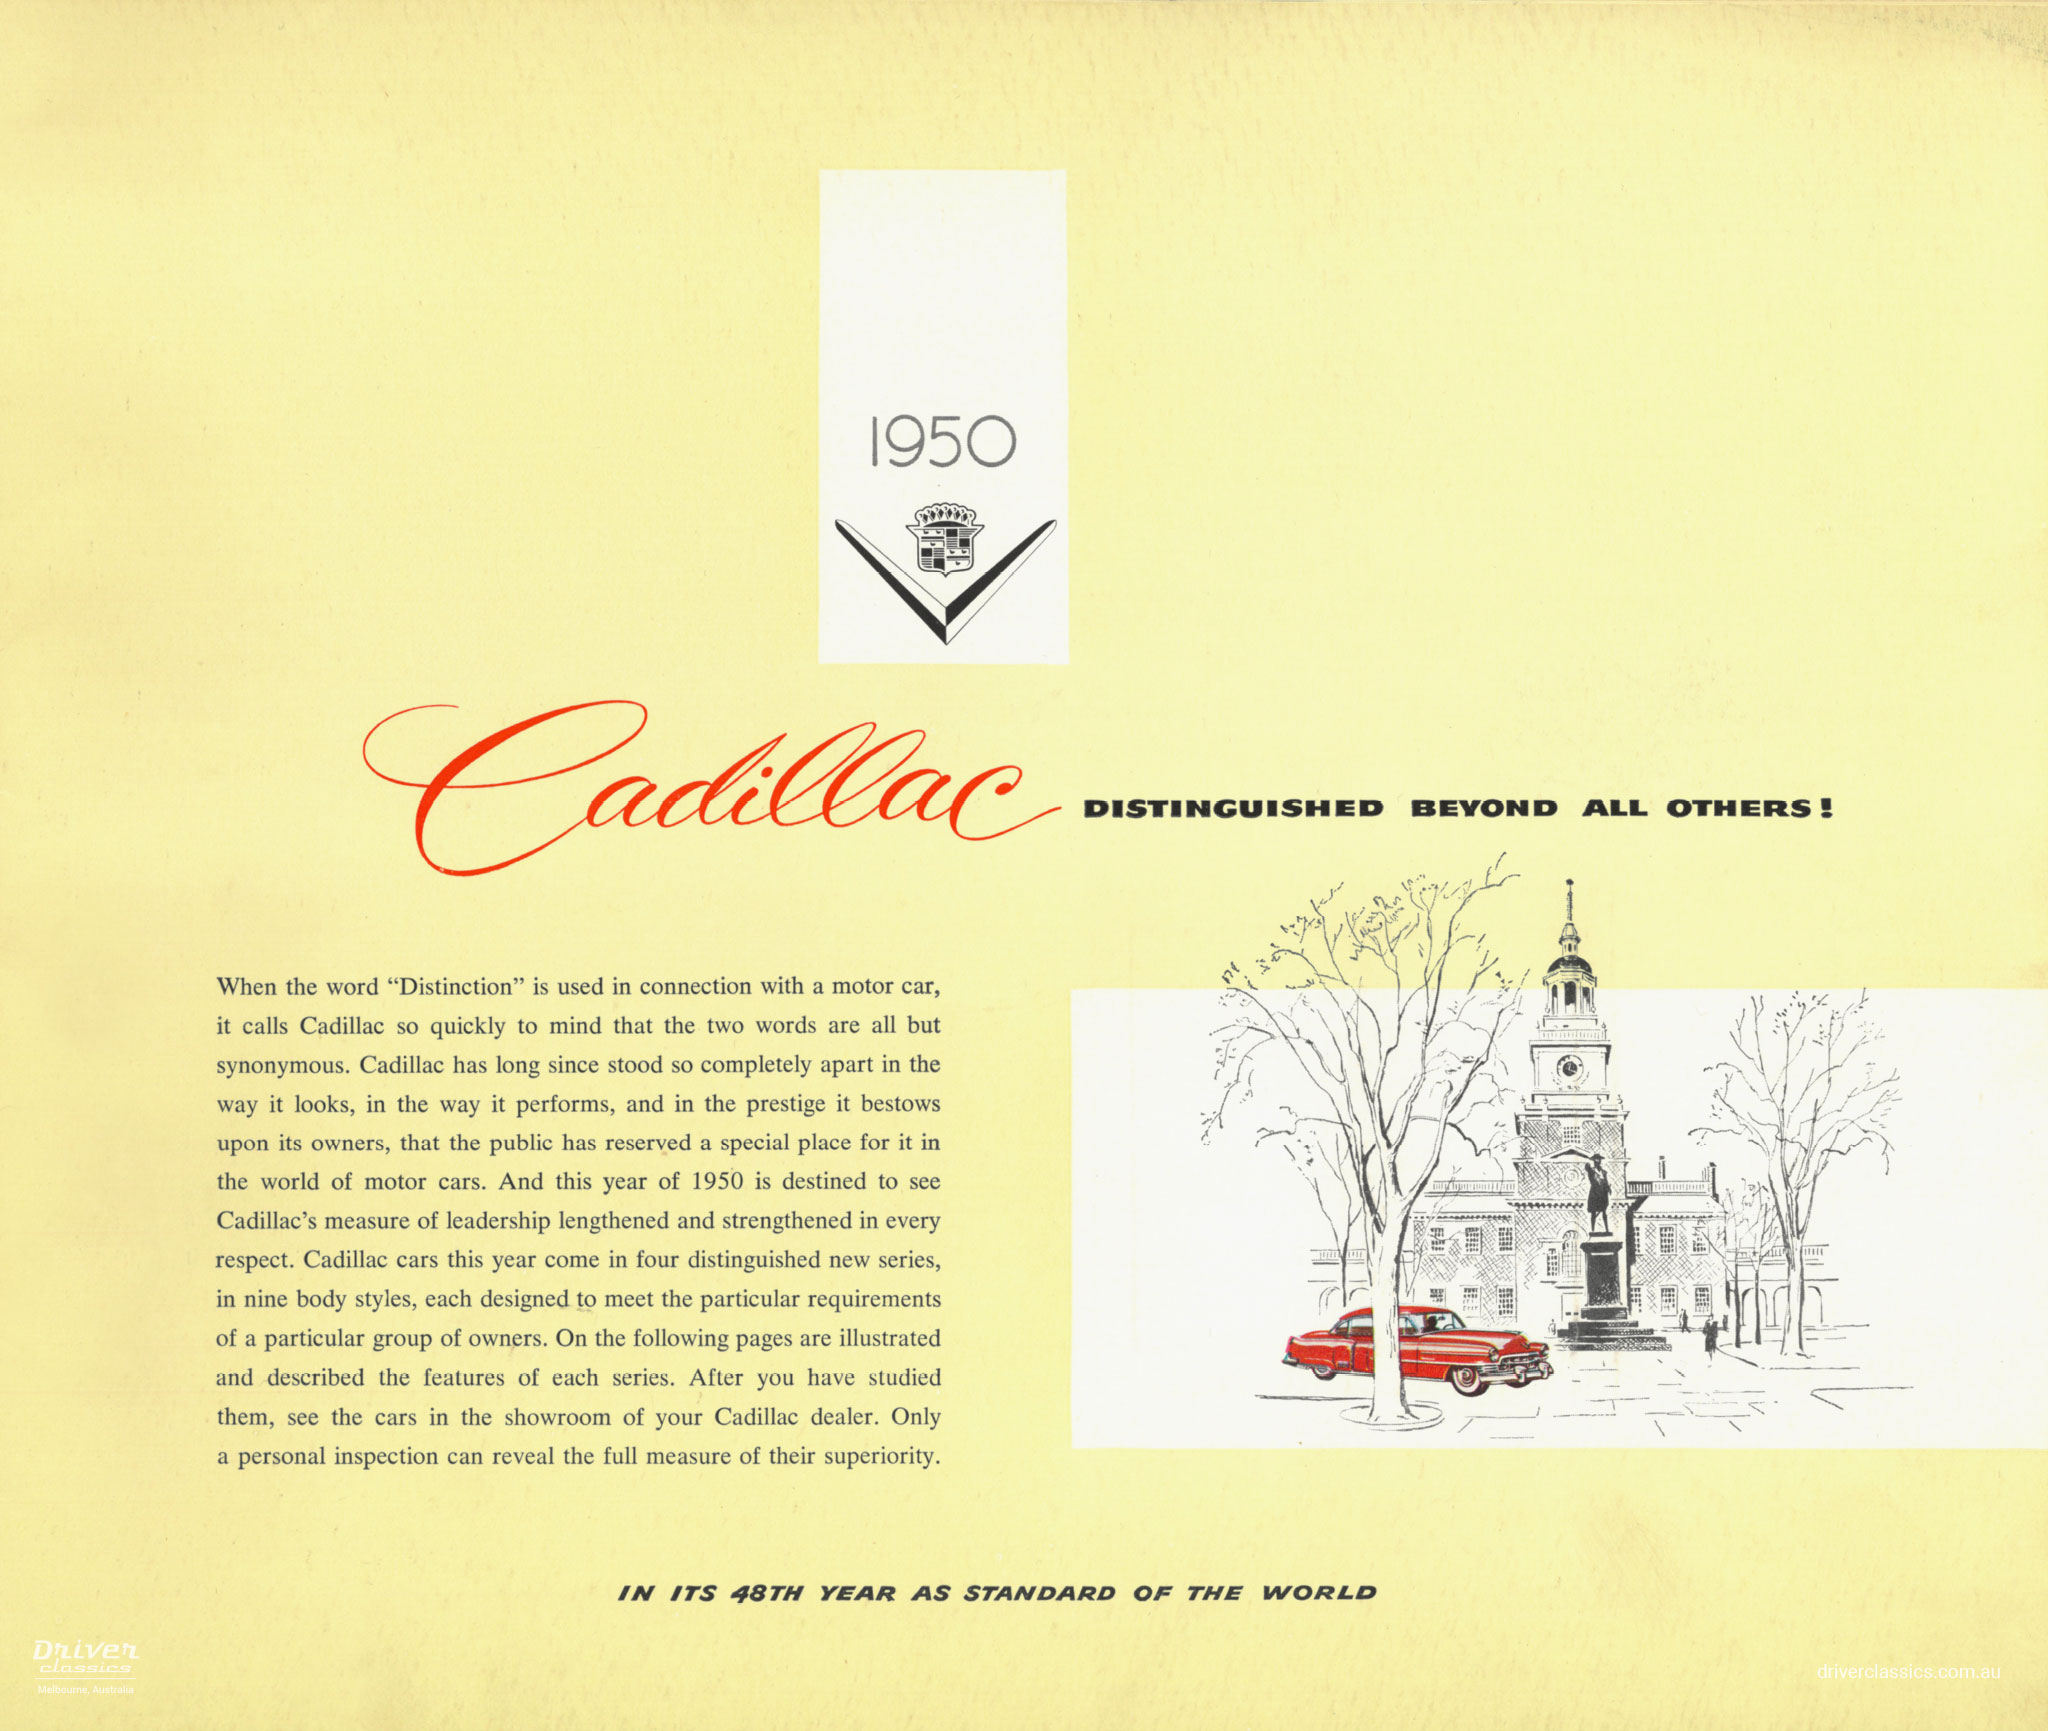 Page from 1950 Cadillac brochure. Reads 